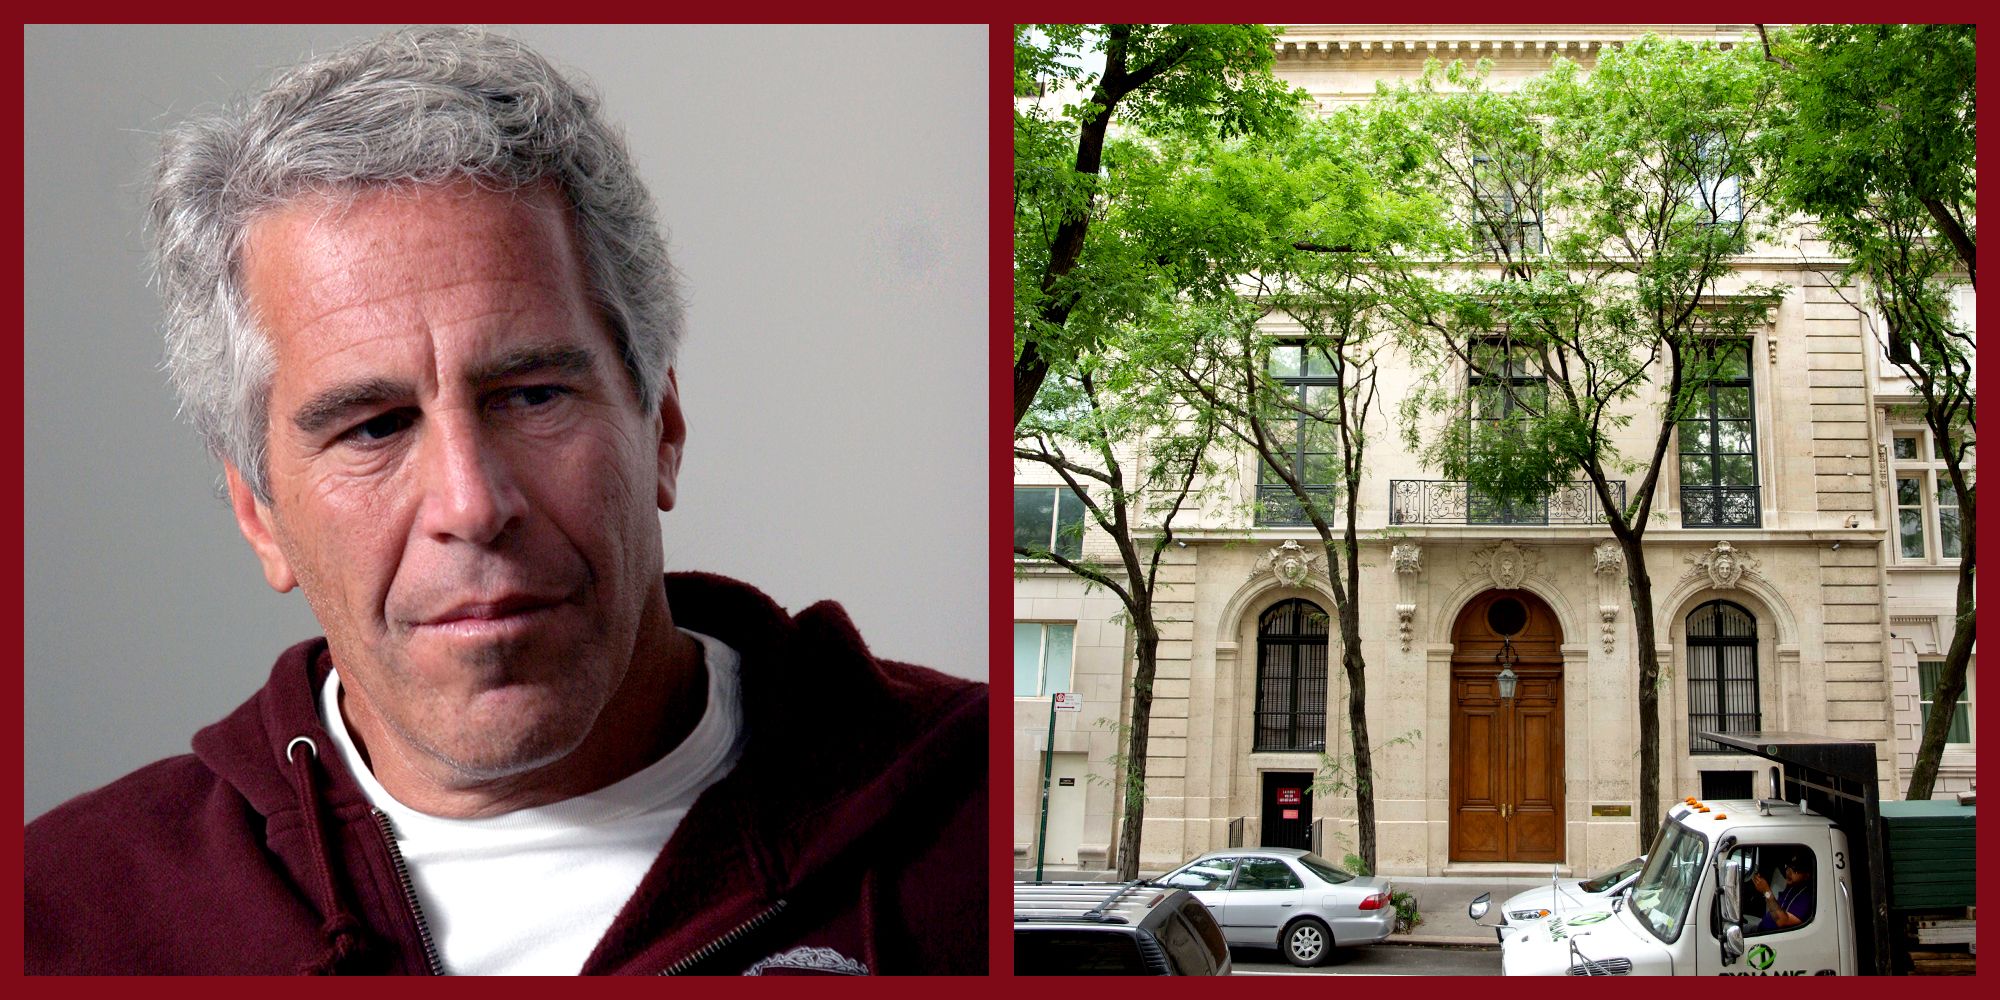 Jeffrey Epstein spied on 'guests' from surveillance room in NYC mansion: lawsuit